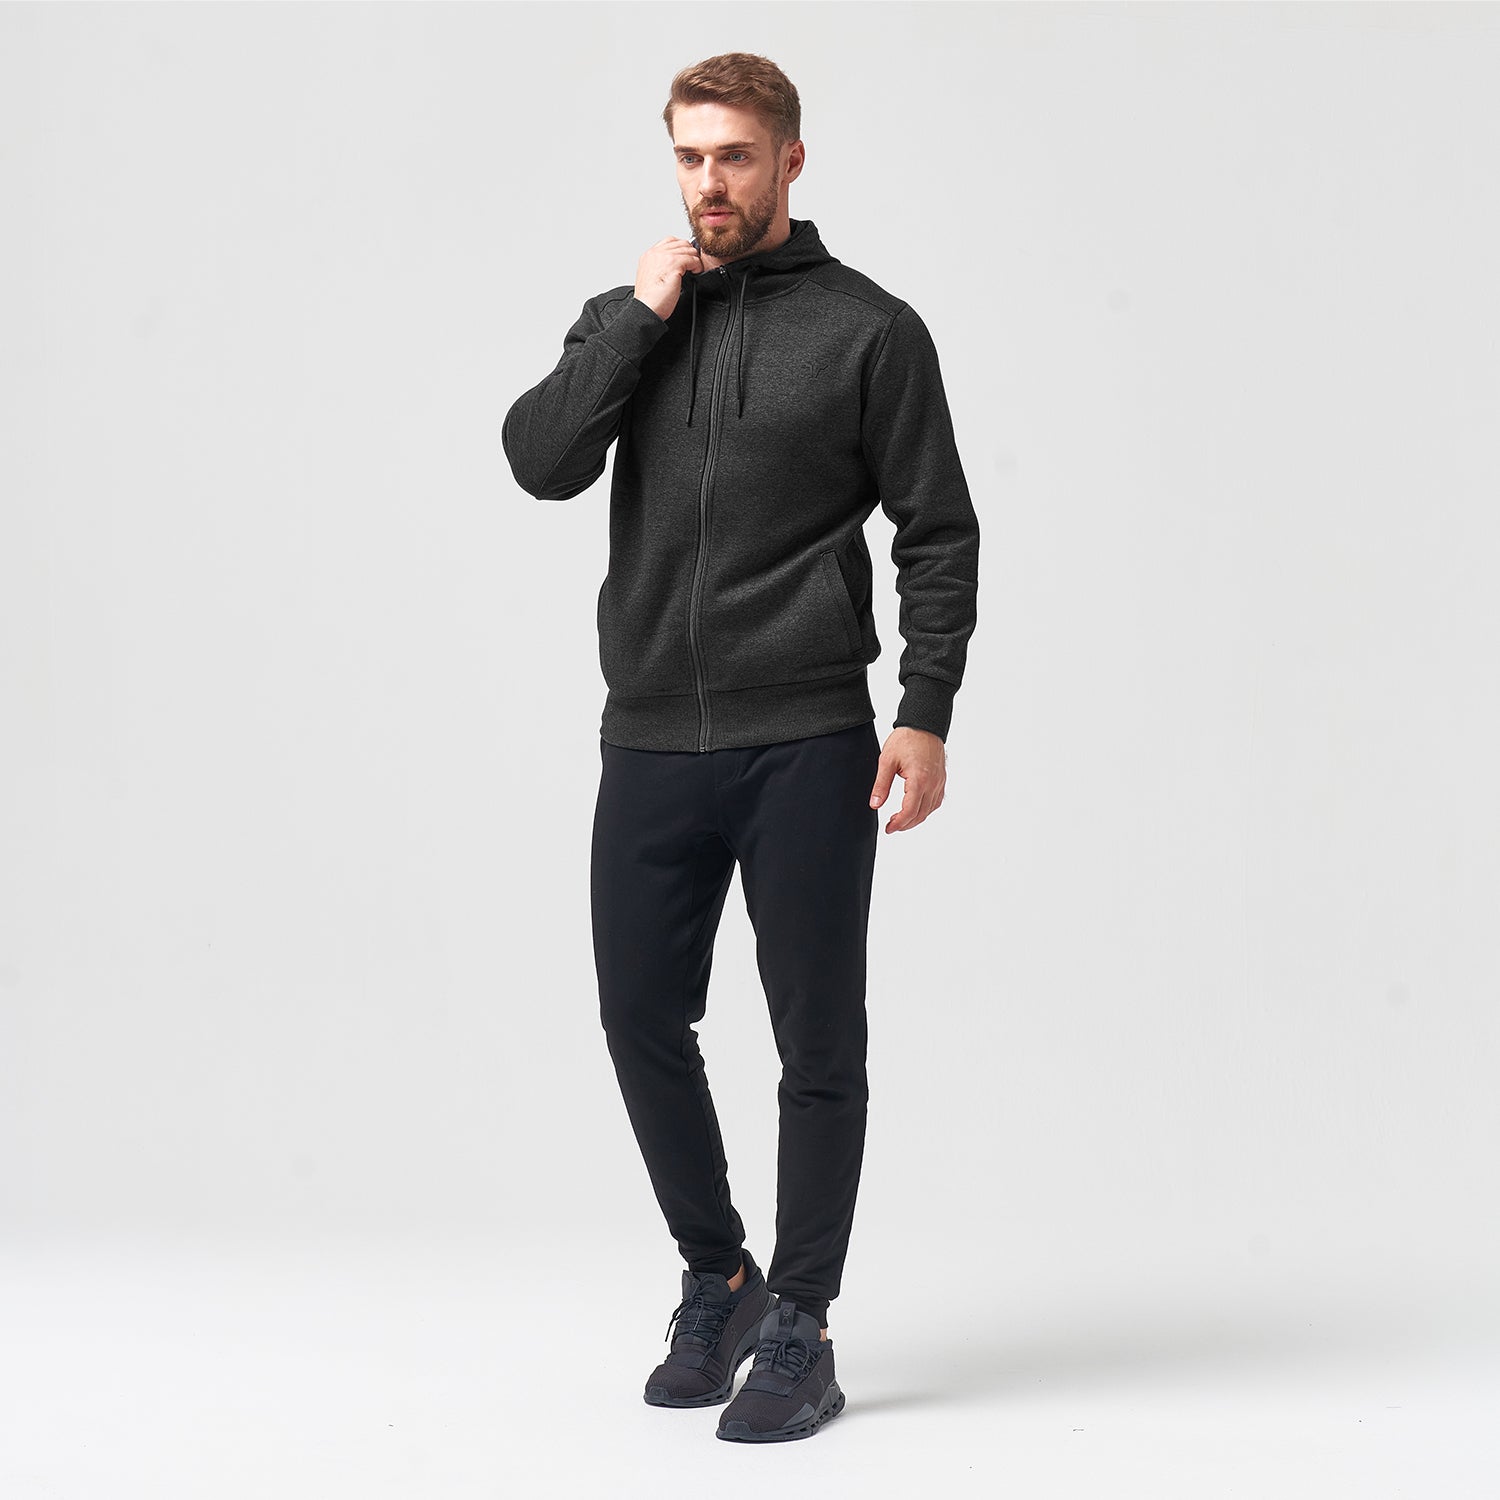 squatwolf-gym-wear-code-urban-hoodie-charcoal-workout-hoodies-for-men